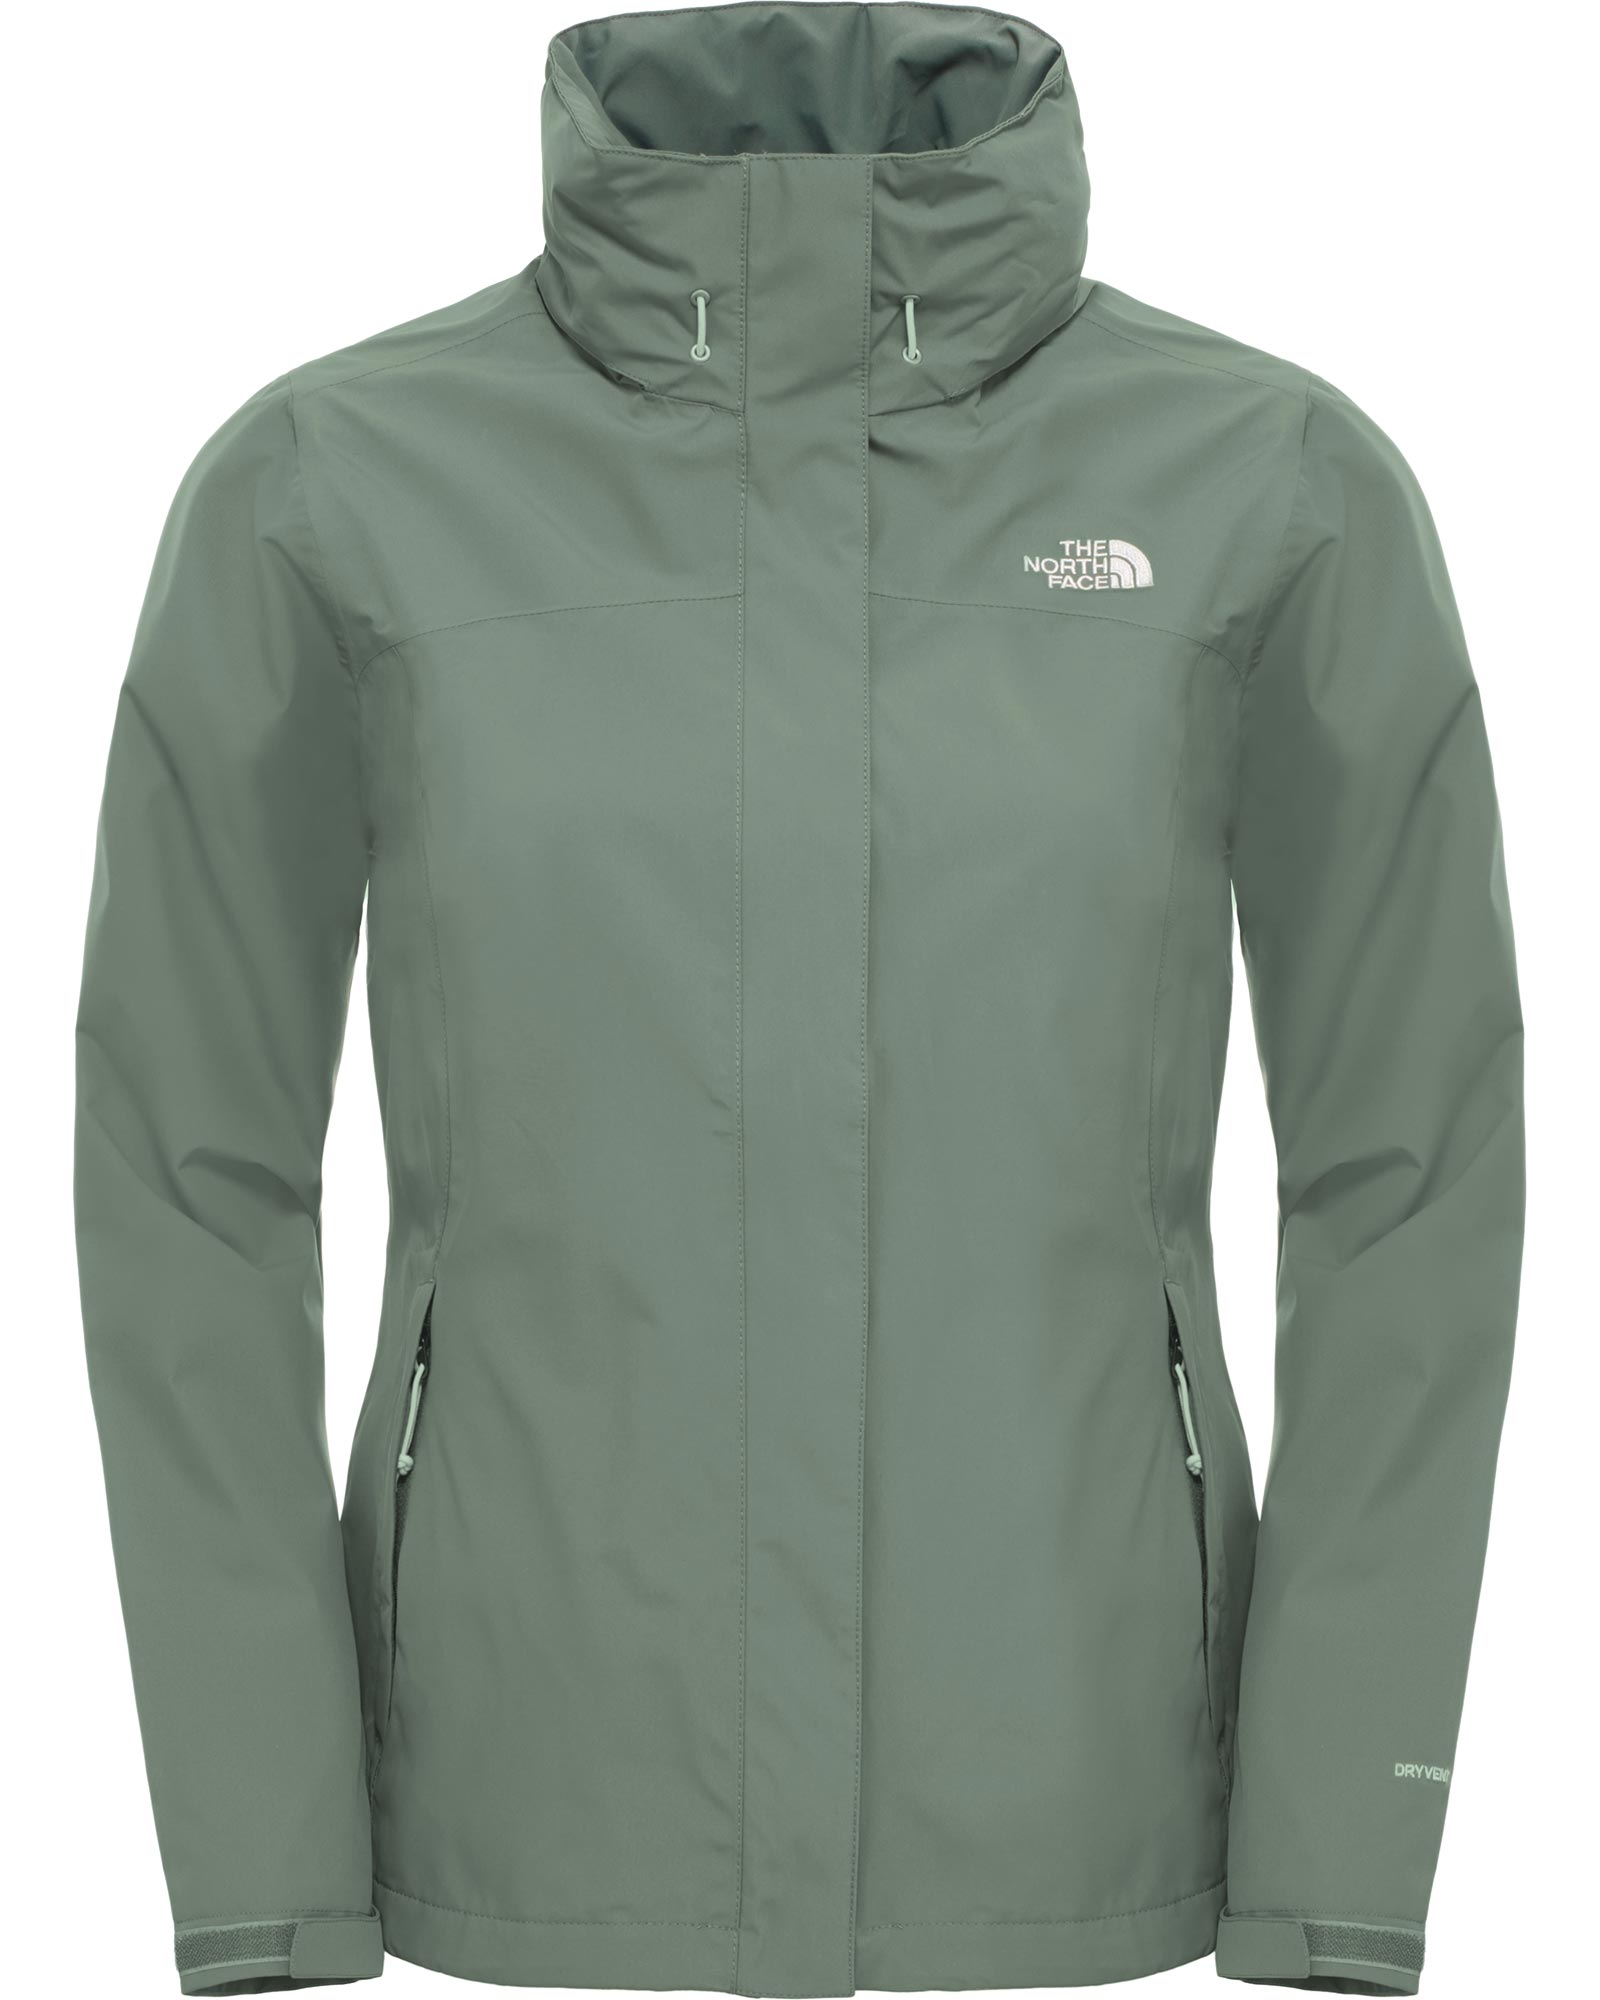 The North Face Sangro DryVent Women’s Jacket - New Taupe Green XS